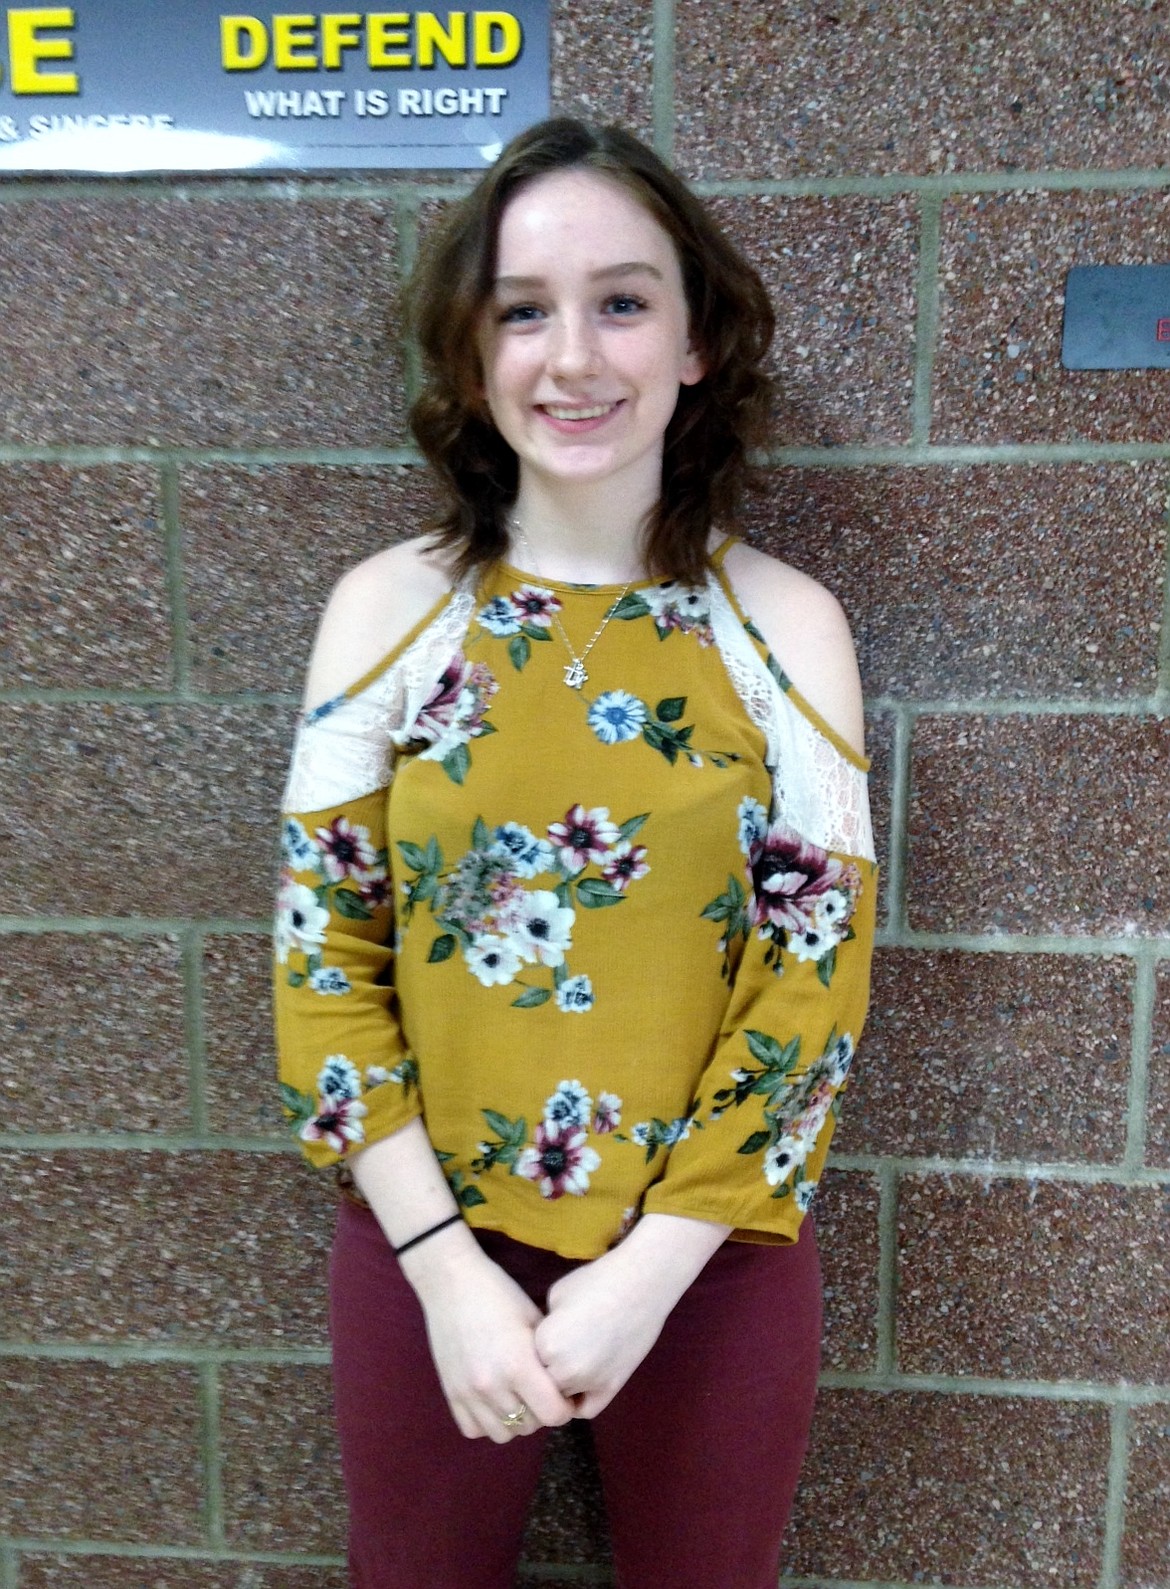 Kelsie Sullivan, a junior at Wallace Junior/Senior High, and daughter of Ron &amp; Sharon Sullivan, is our second Elks Teen of the Month for March. Kelsie is a manager for the Volleyball team and is a member of Technology Student Association. Out of school, she enjoys studying dance and her favorite school subject is English. After high school Kelsie would like to attend college to study Radiology.